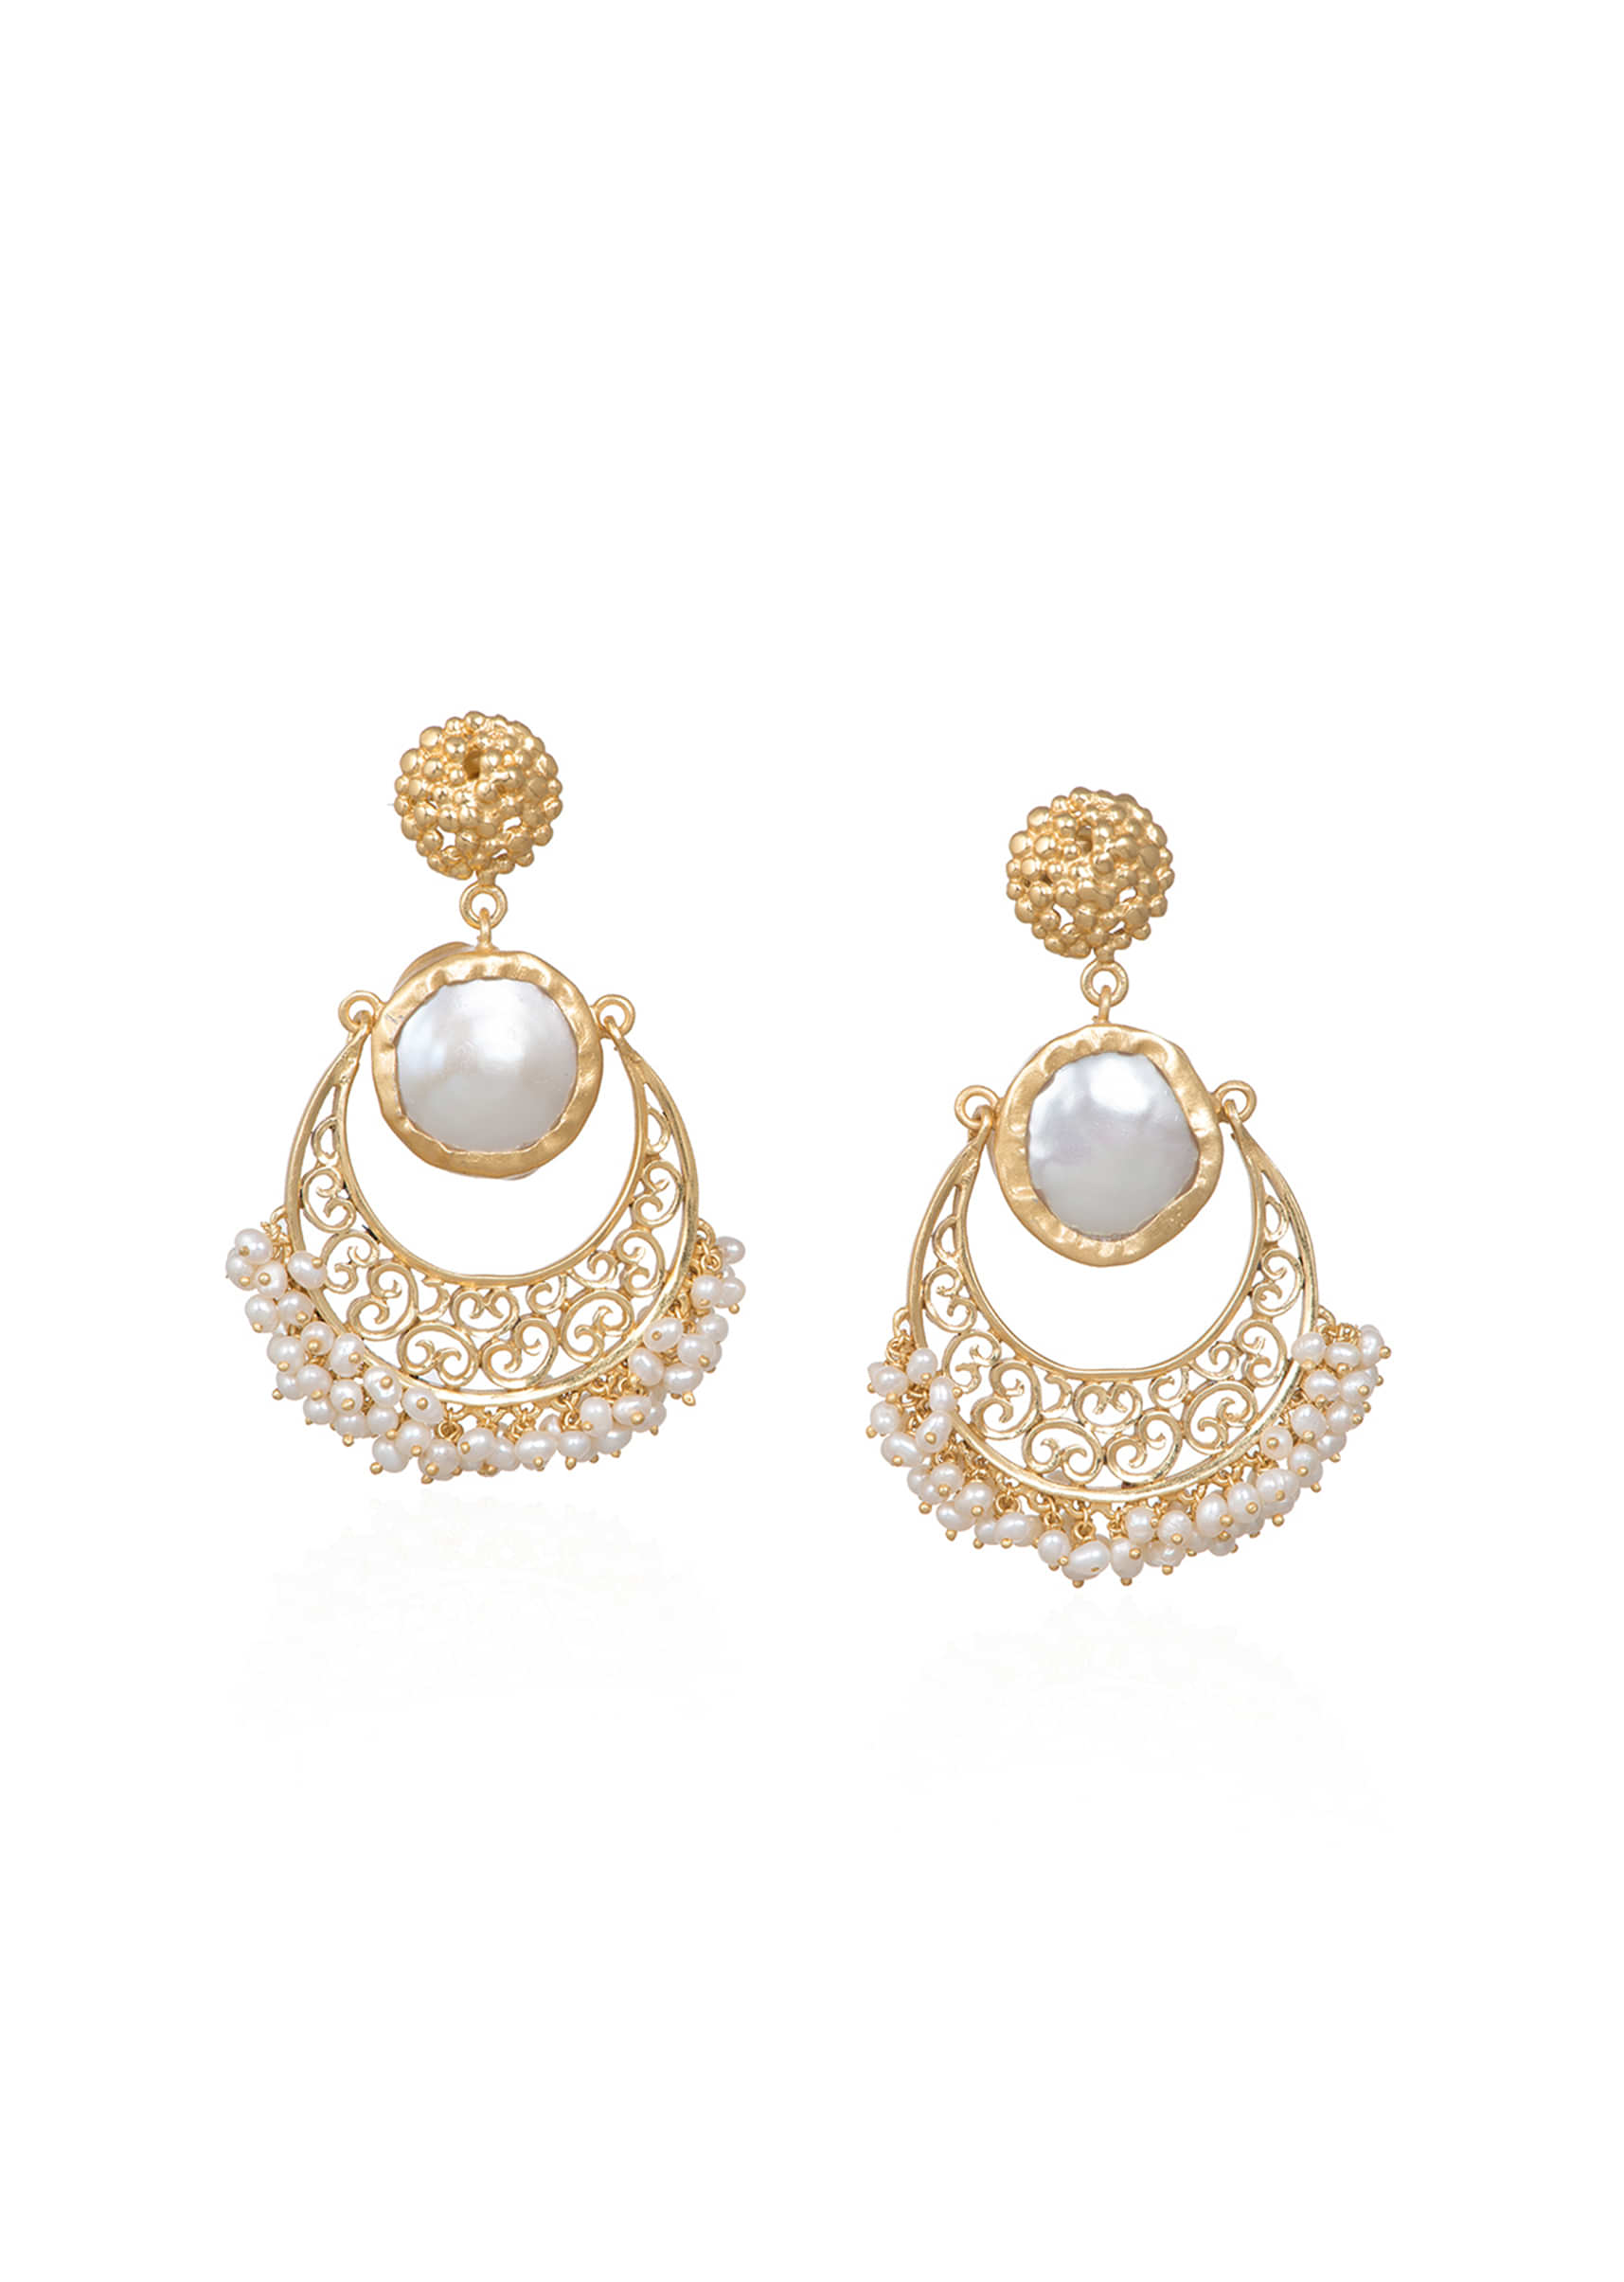 Gold Plated Earrings With Amethyst And Tiny Bits Of Pearls By Zariin